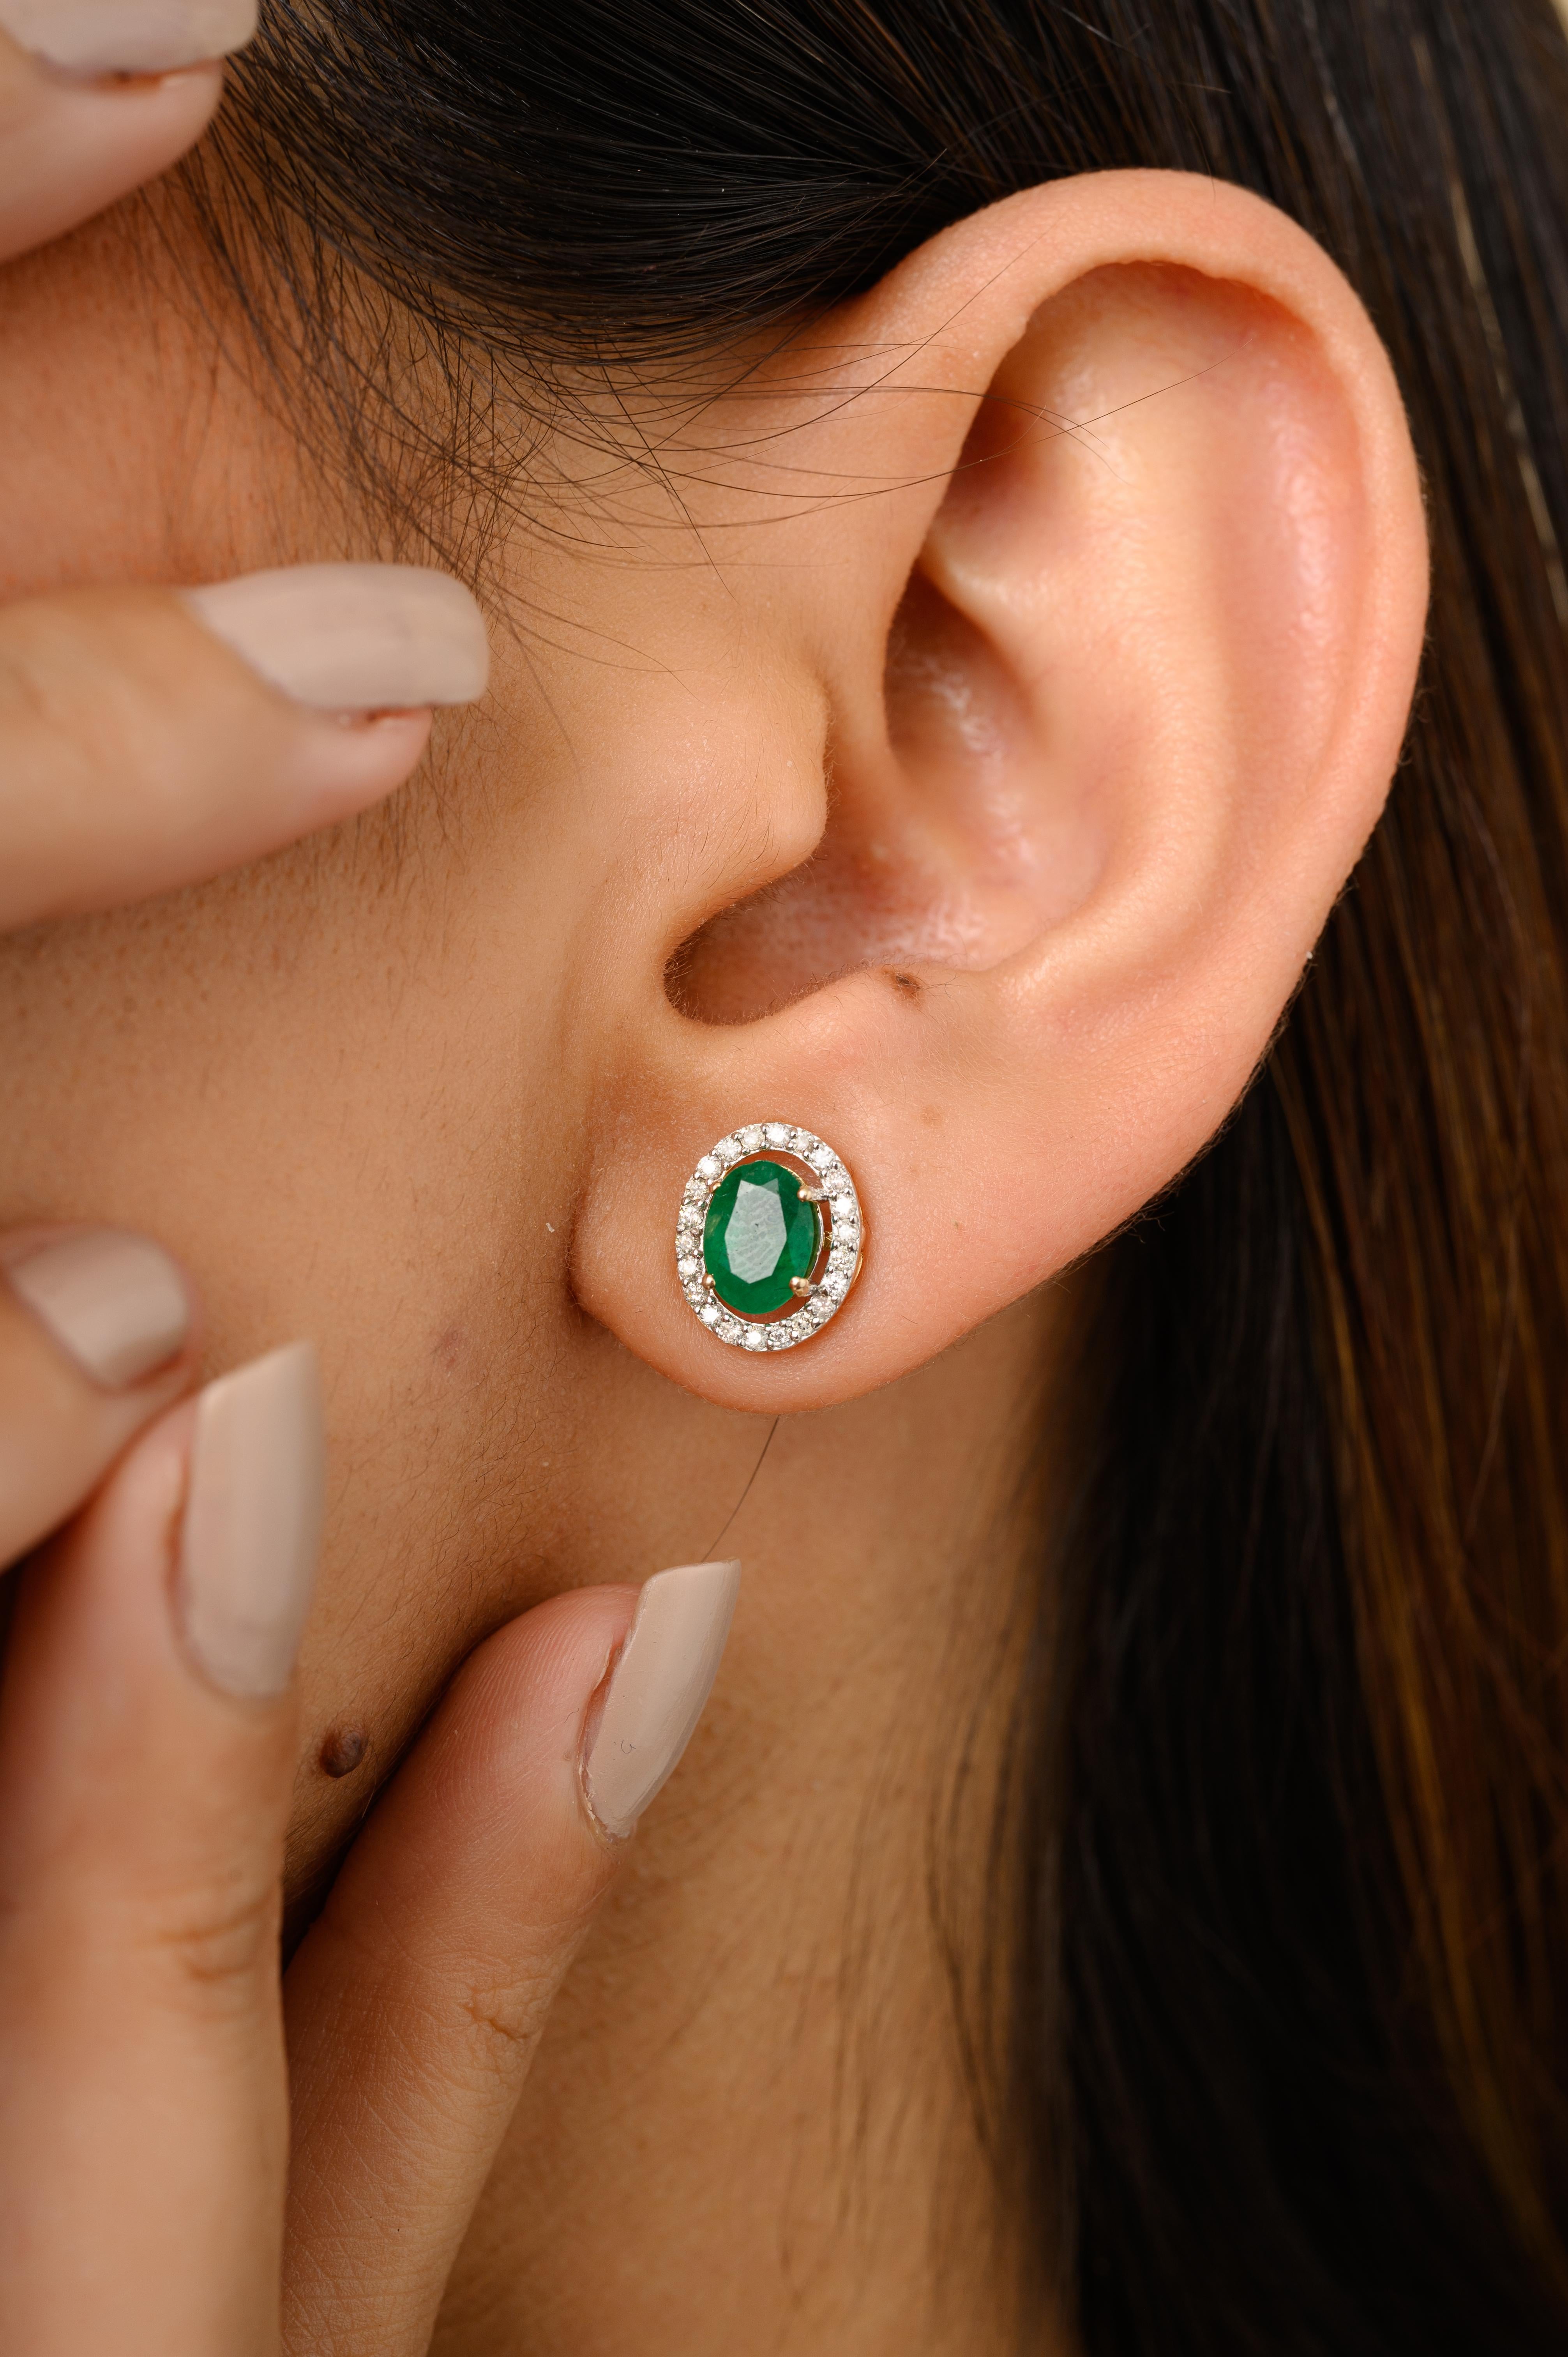 Oval Emerald and Diamond Halo Stud Earrings Gift for Mom in 14K Gold to make a statement with your look. You shall need stud earrings to make a statement with your look. These earrings create a sparkling, luxurious look featuring oval cut emerald